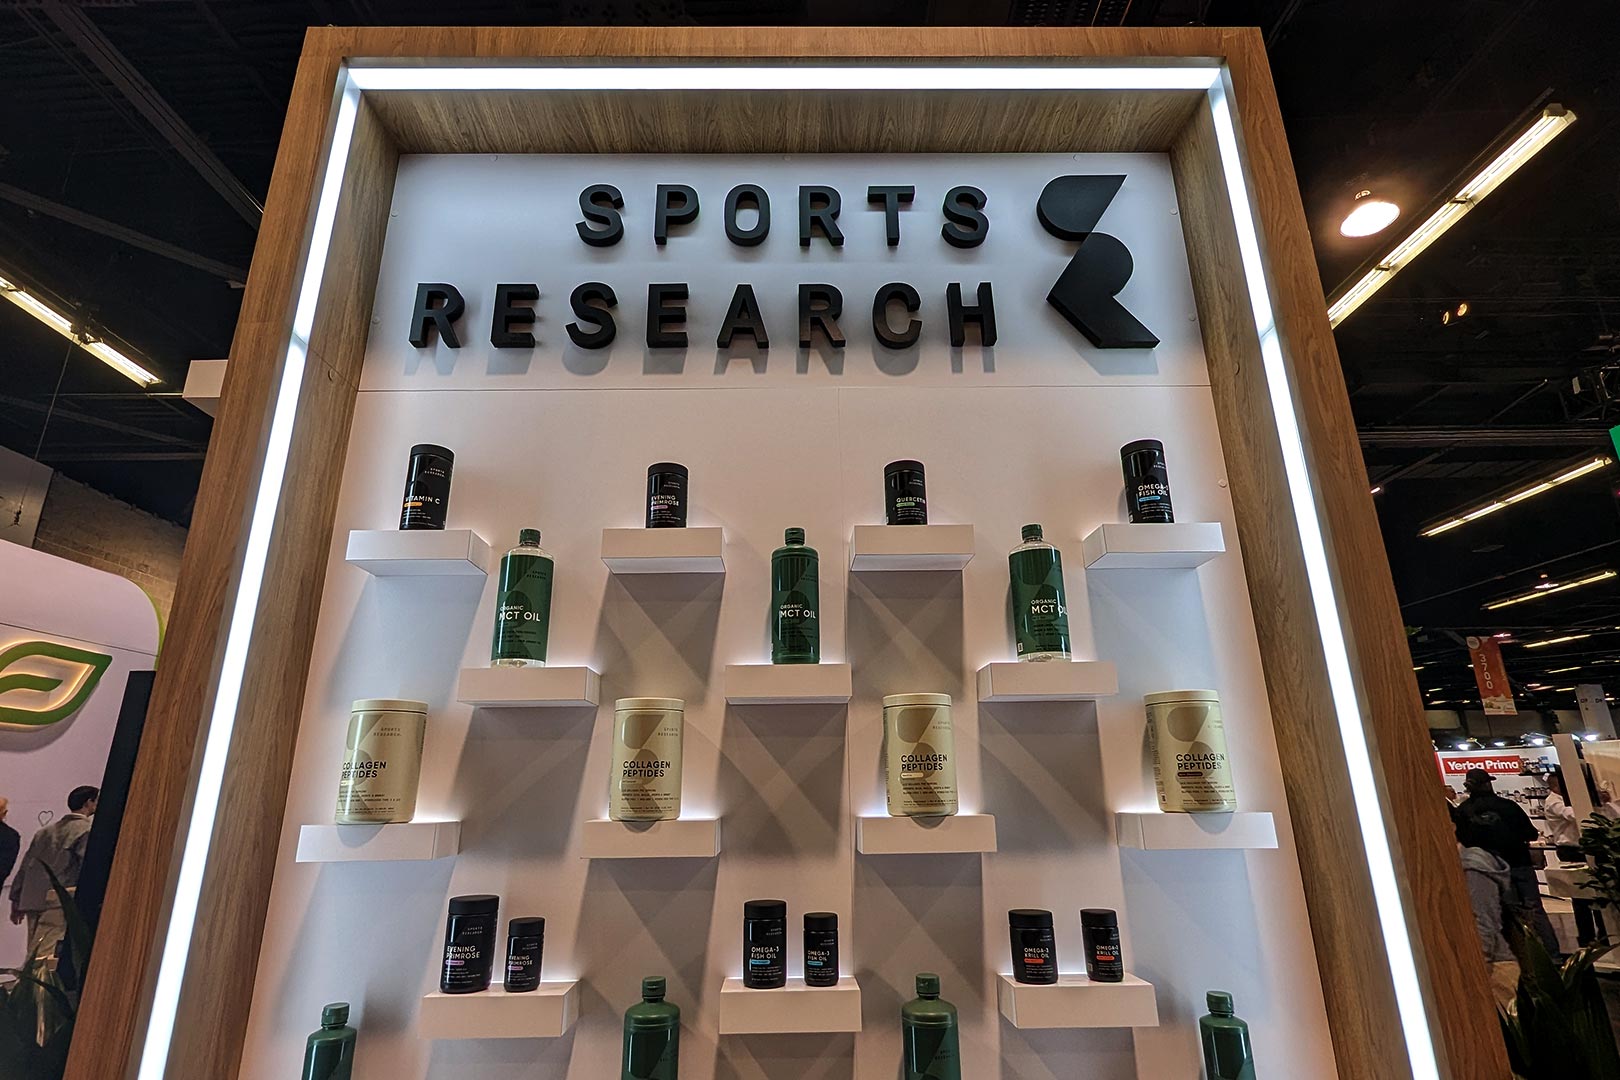 Sports Research introduces its completely new look at Expo West